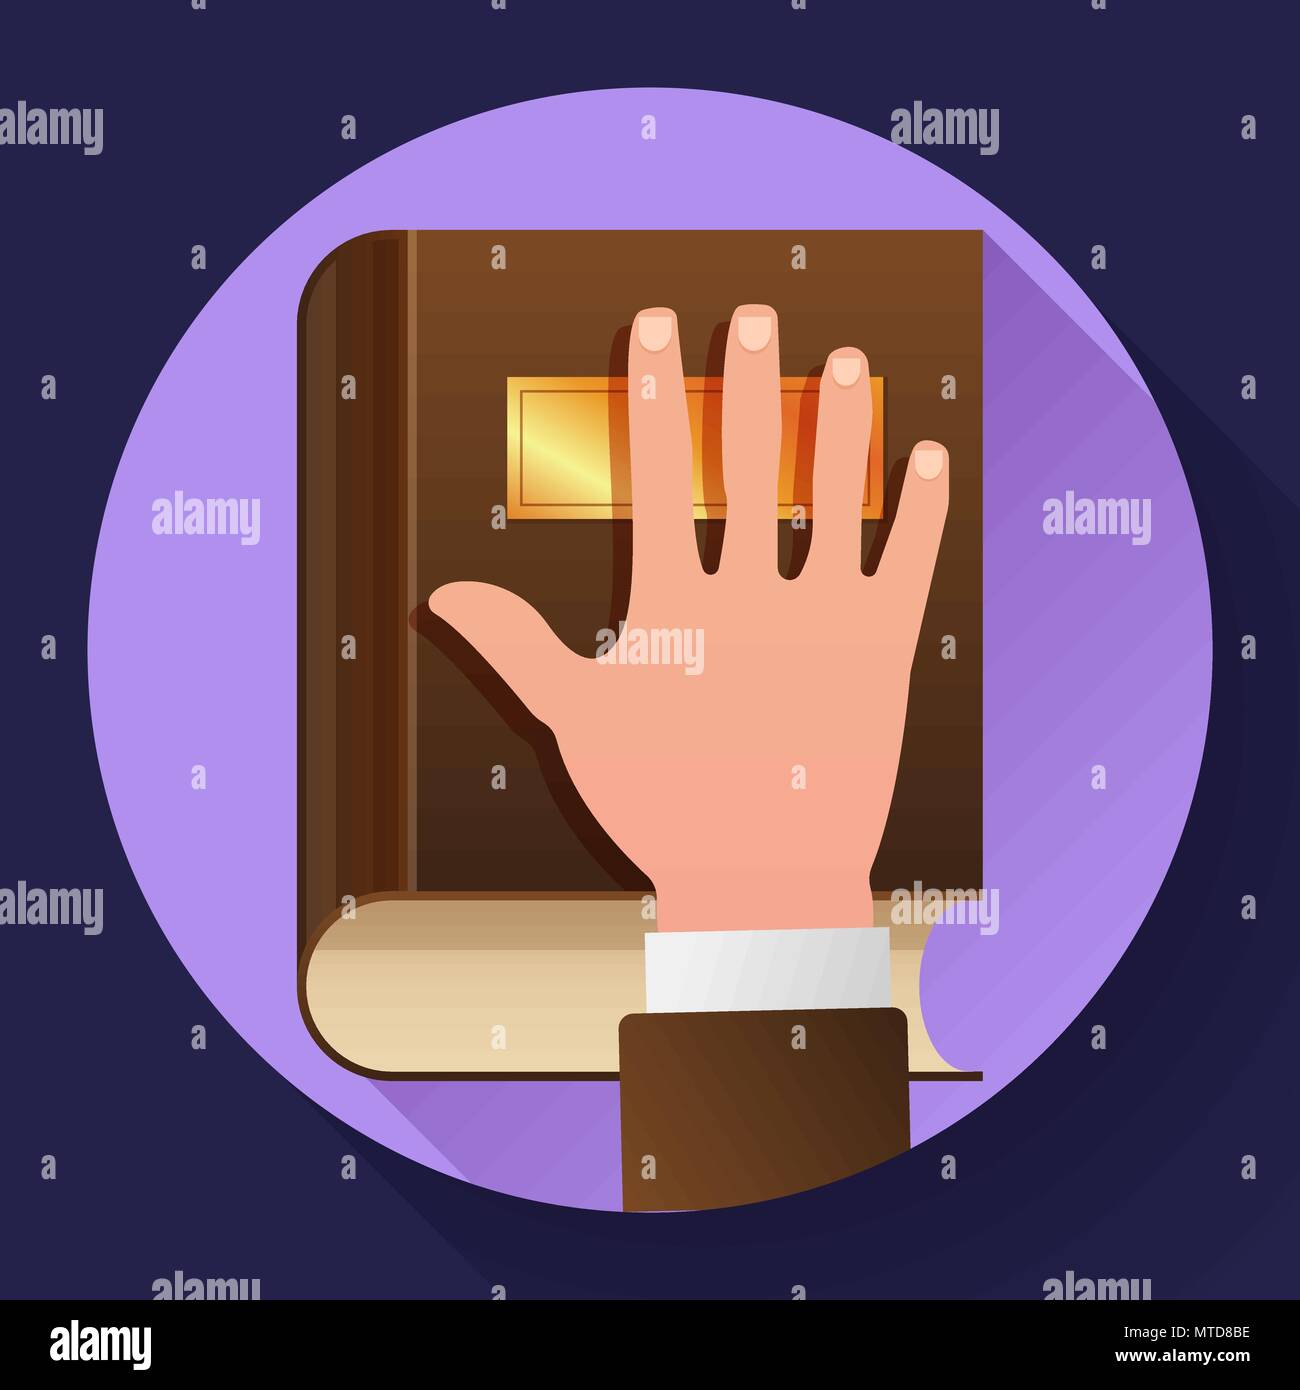 Hand on Constitution as Oath Concept Icon Stock Vector